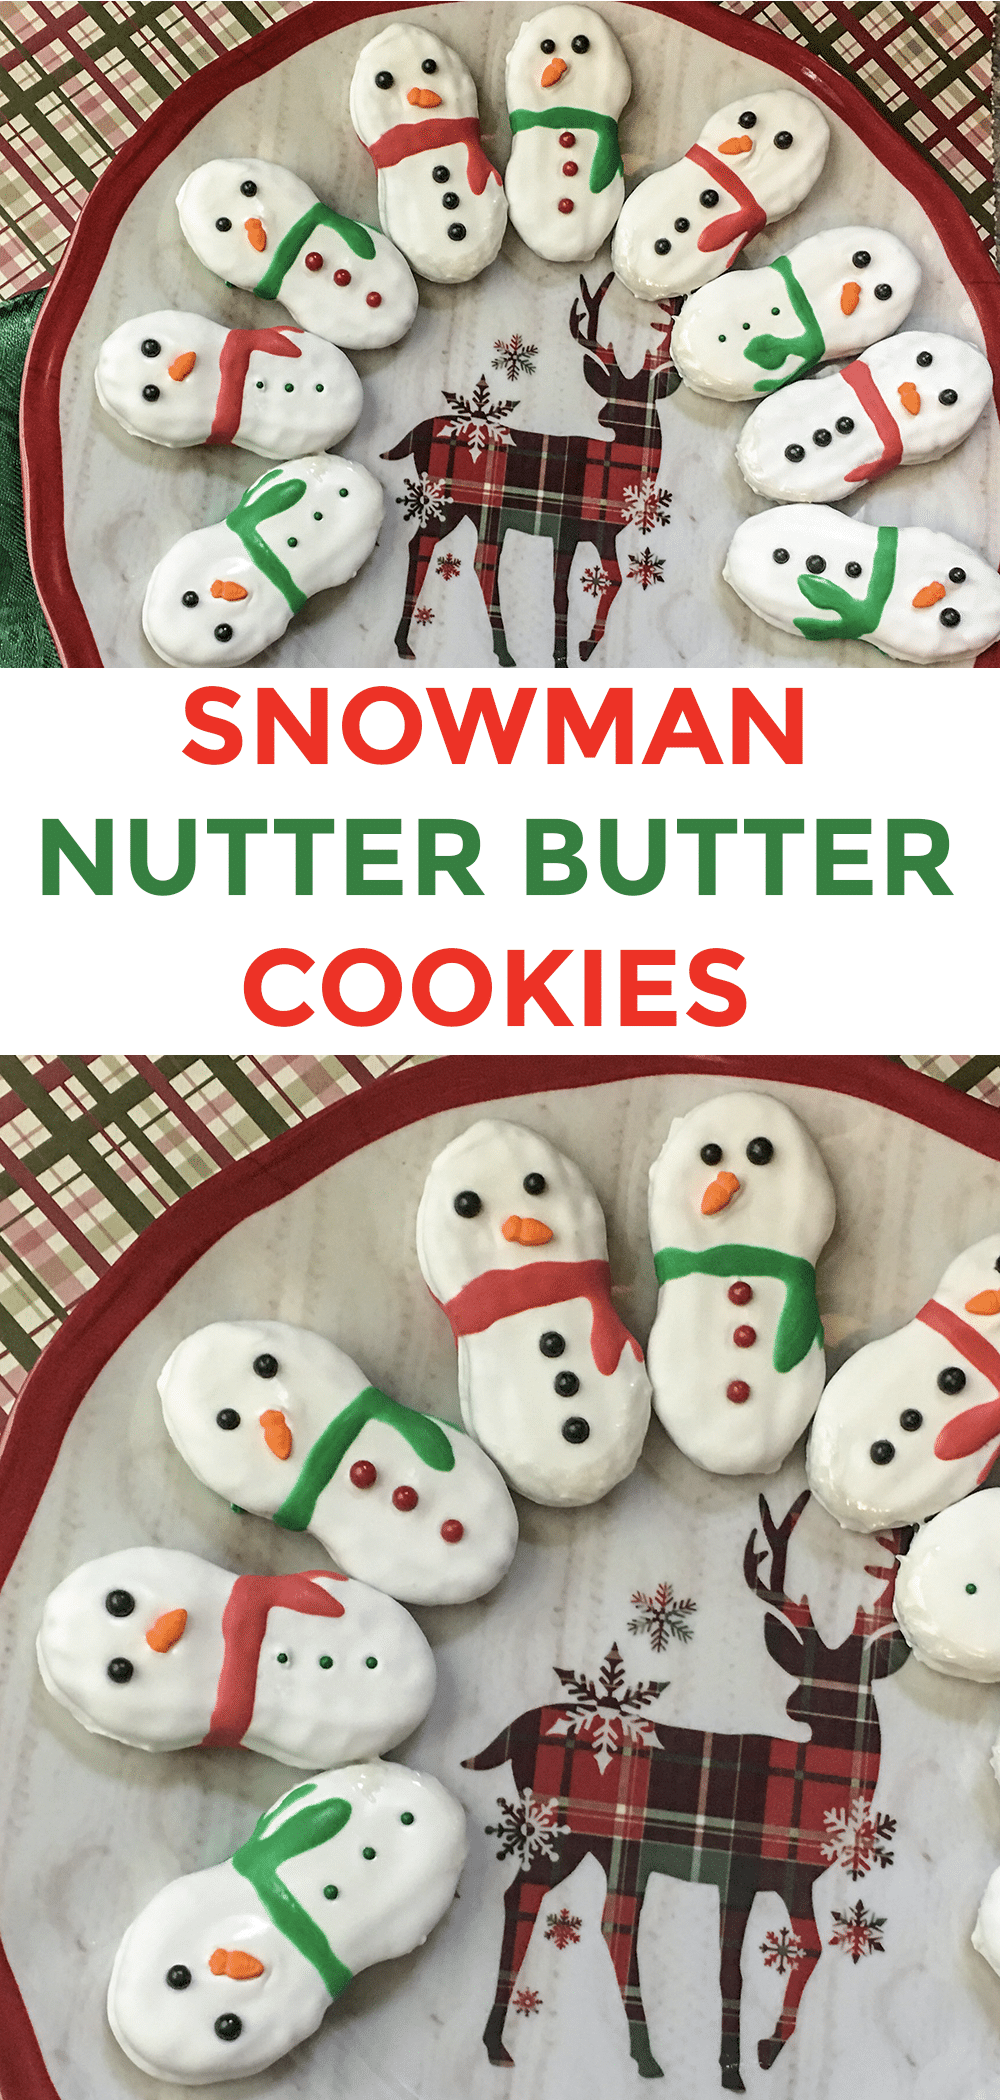 These Snowman Nutter Butter Cookies are an adorable winter treat and they're super easy to make! #nutterbutter #funfoodforkids #wintertreat via @wondermomwannab